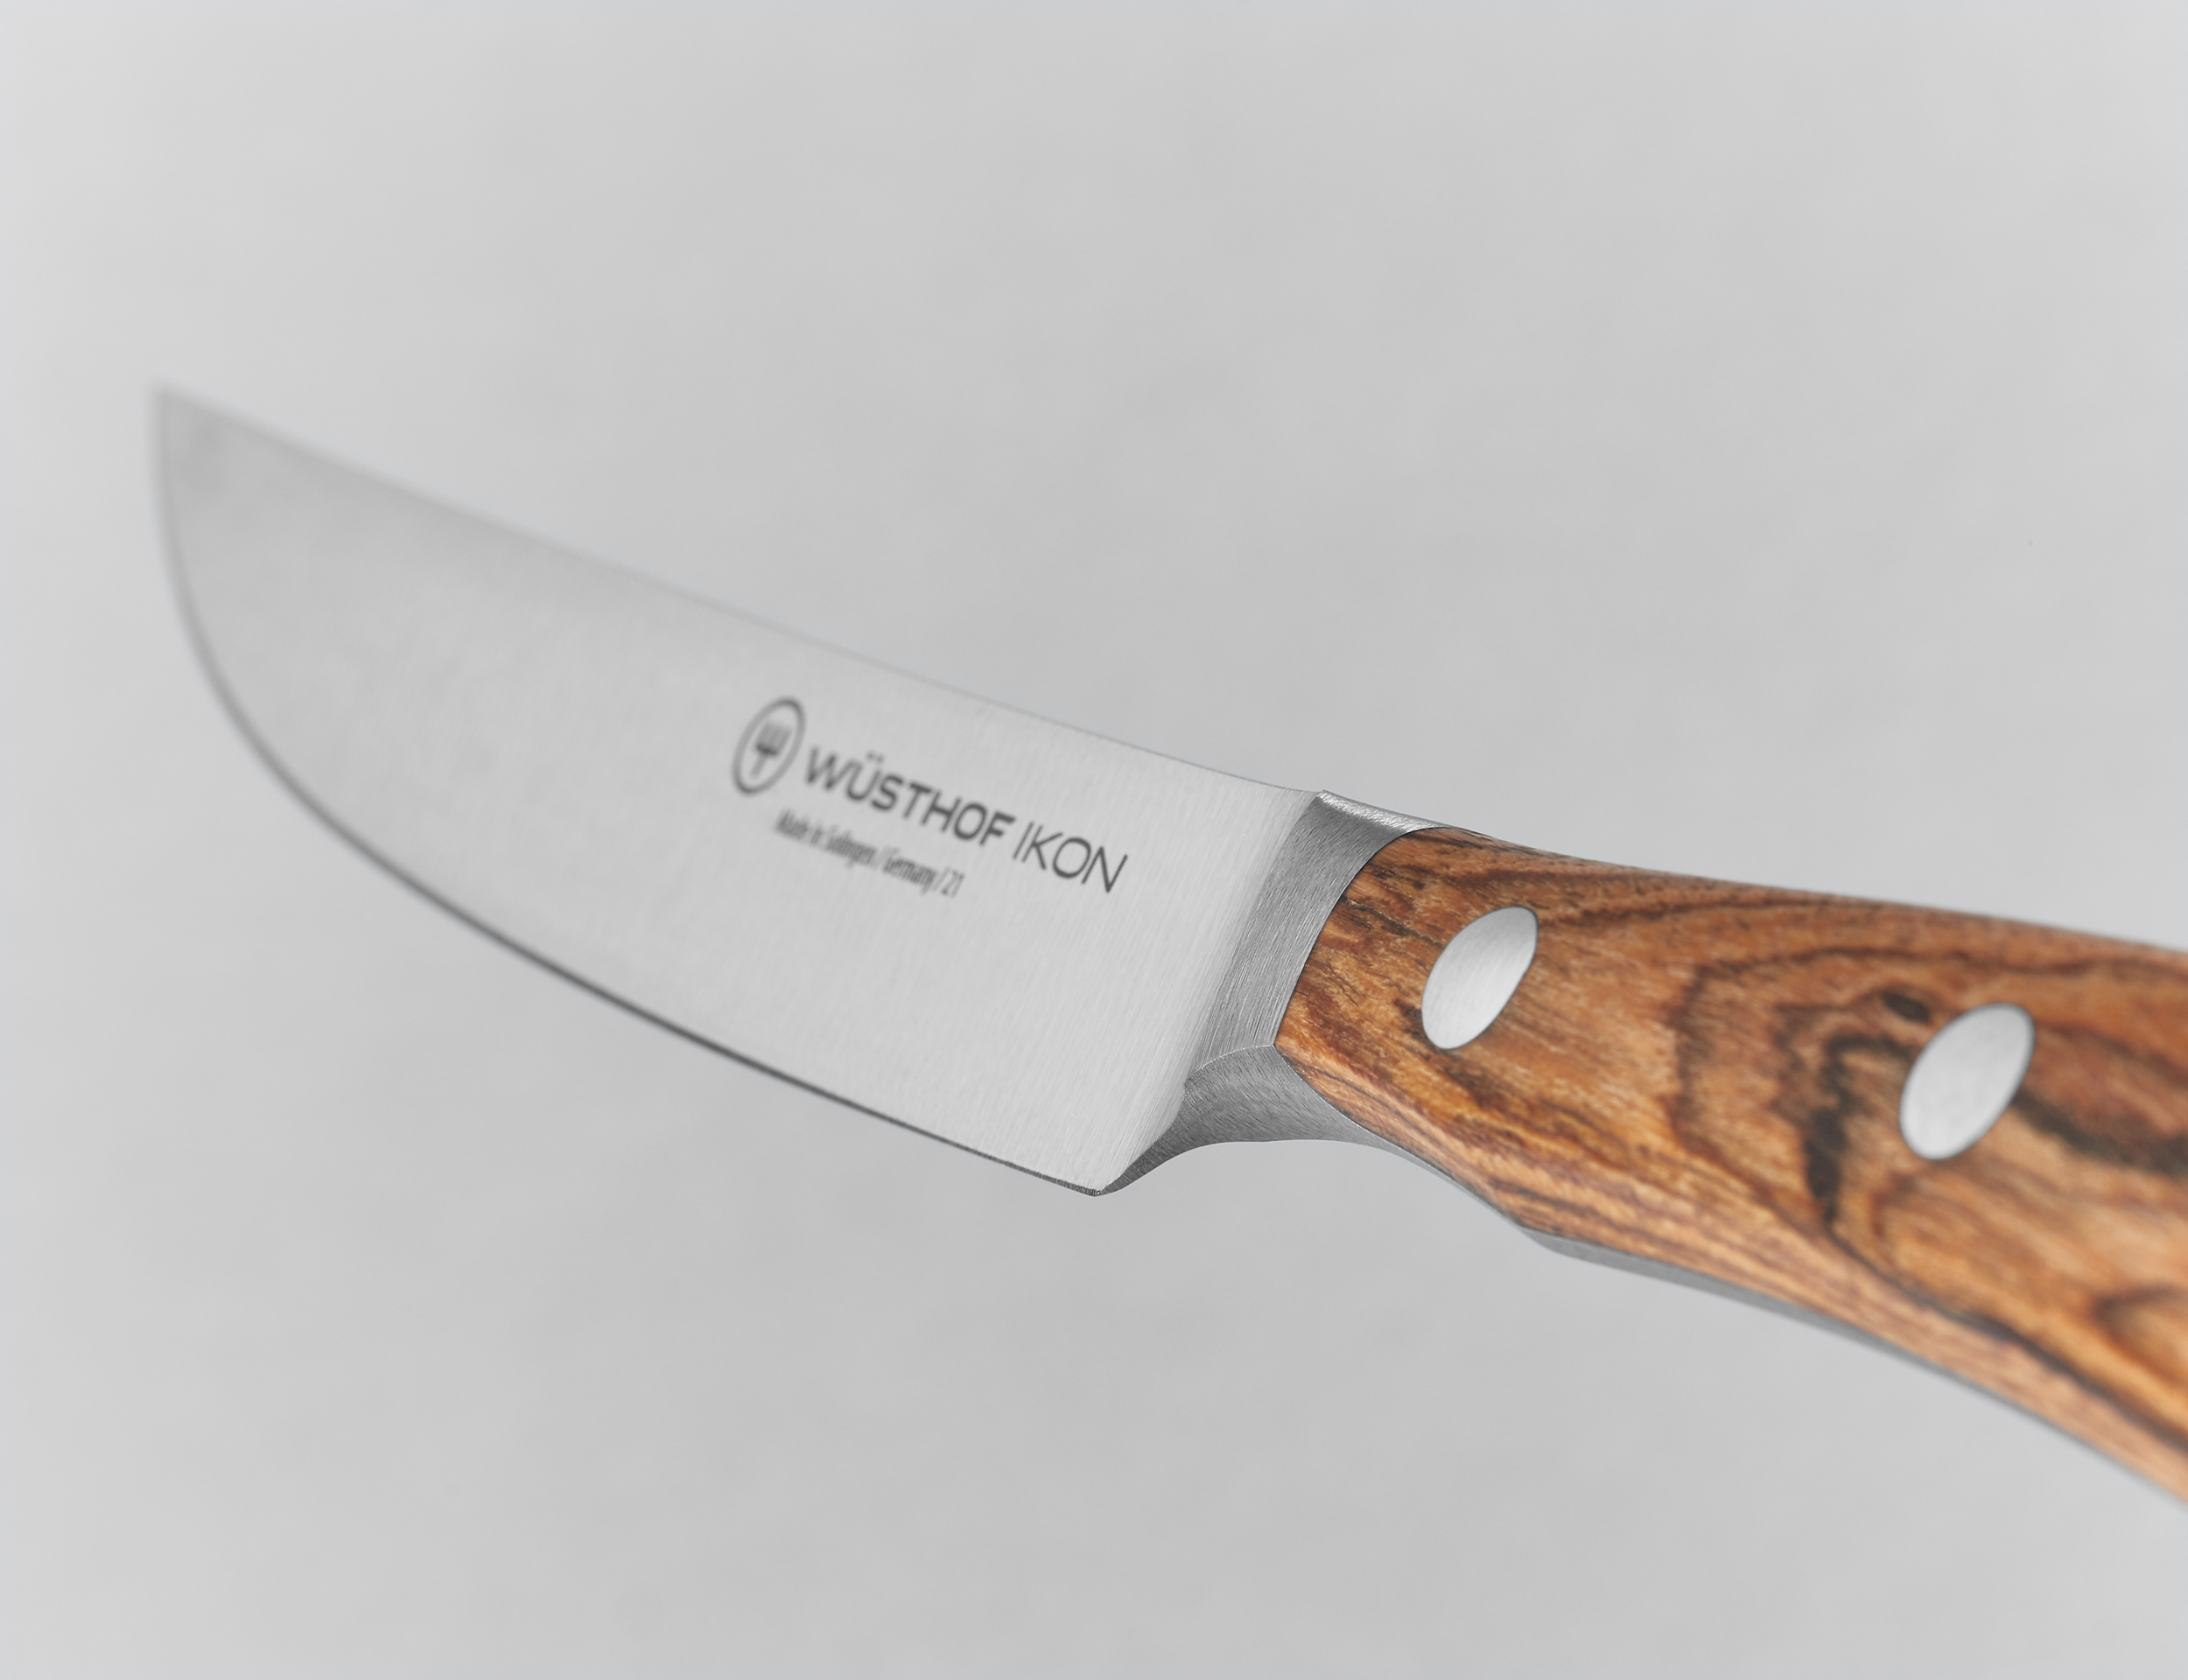 https://cdn.shopify.com/s/files/1/0608/3313/6870/products/1060560601_detail_knife_02_01.png?v=1659366784